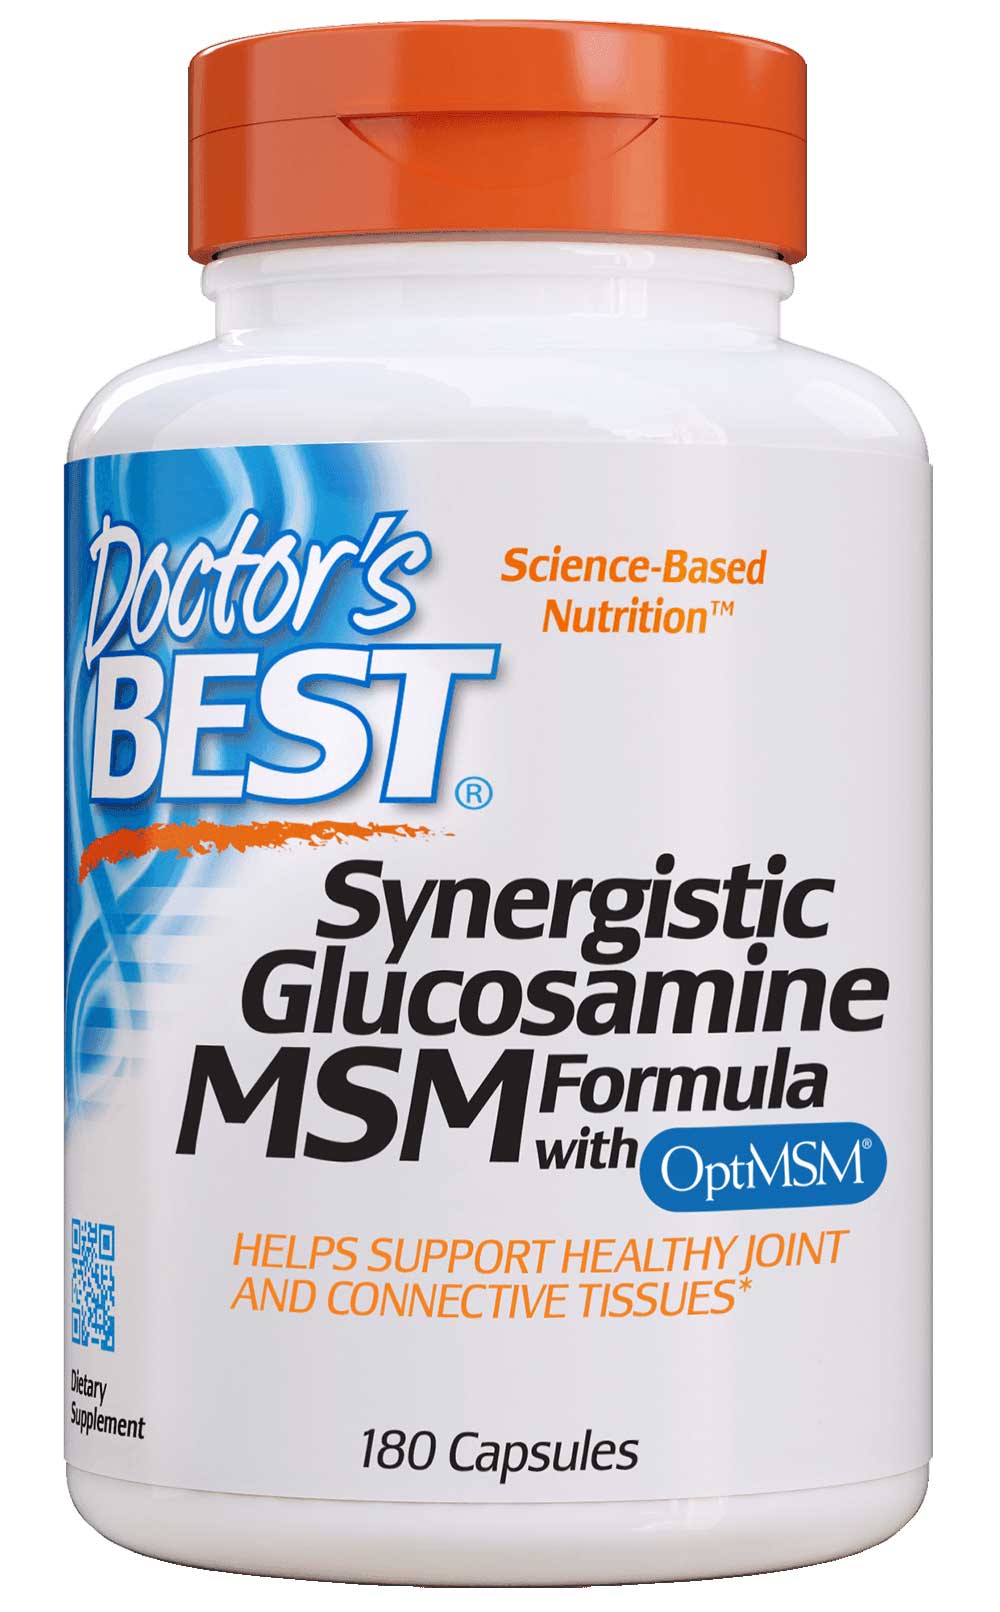 Doctor's Best Synergistic Glucosamine MSM Formula with OptiMSM